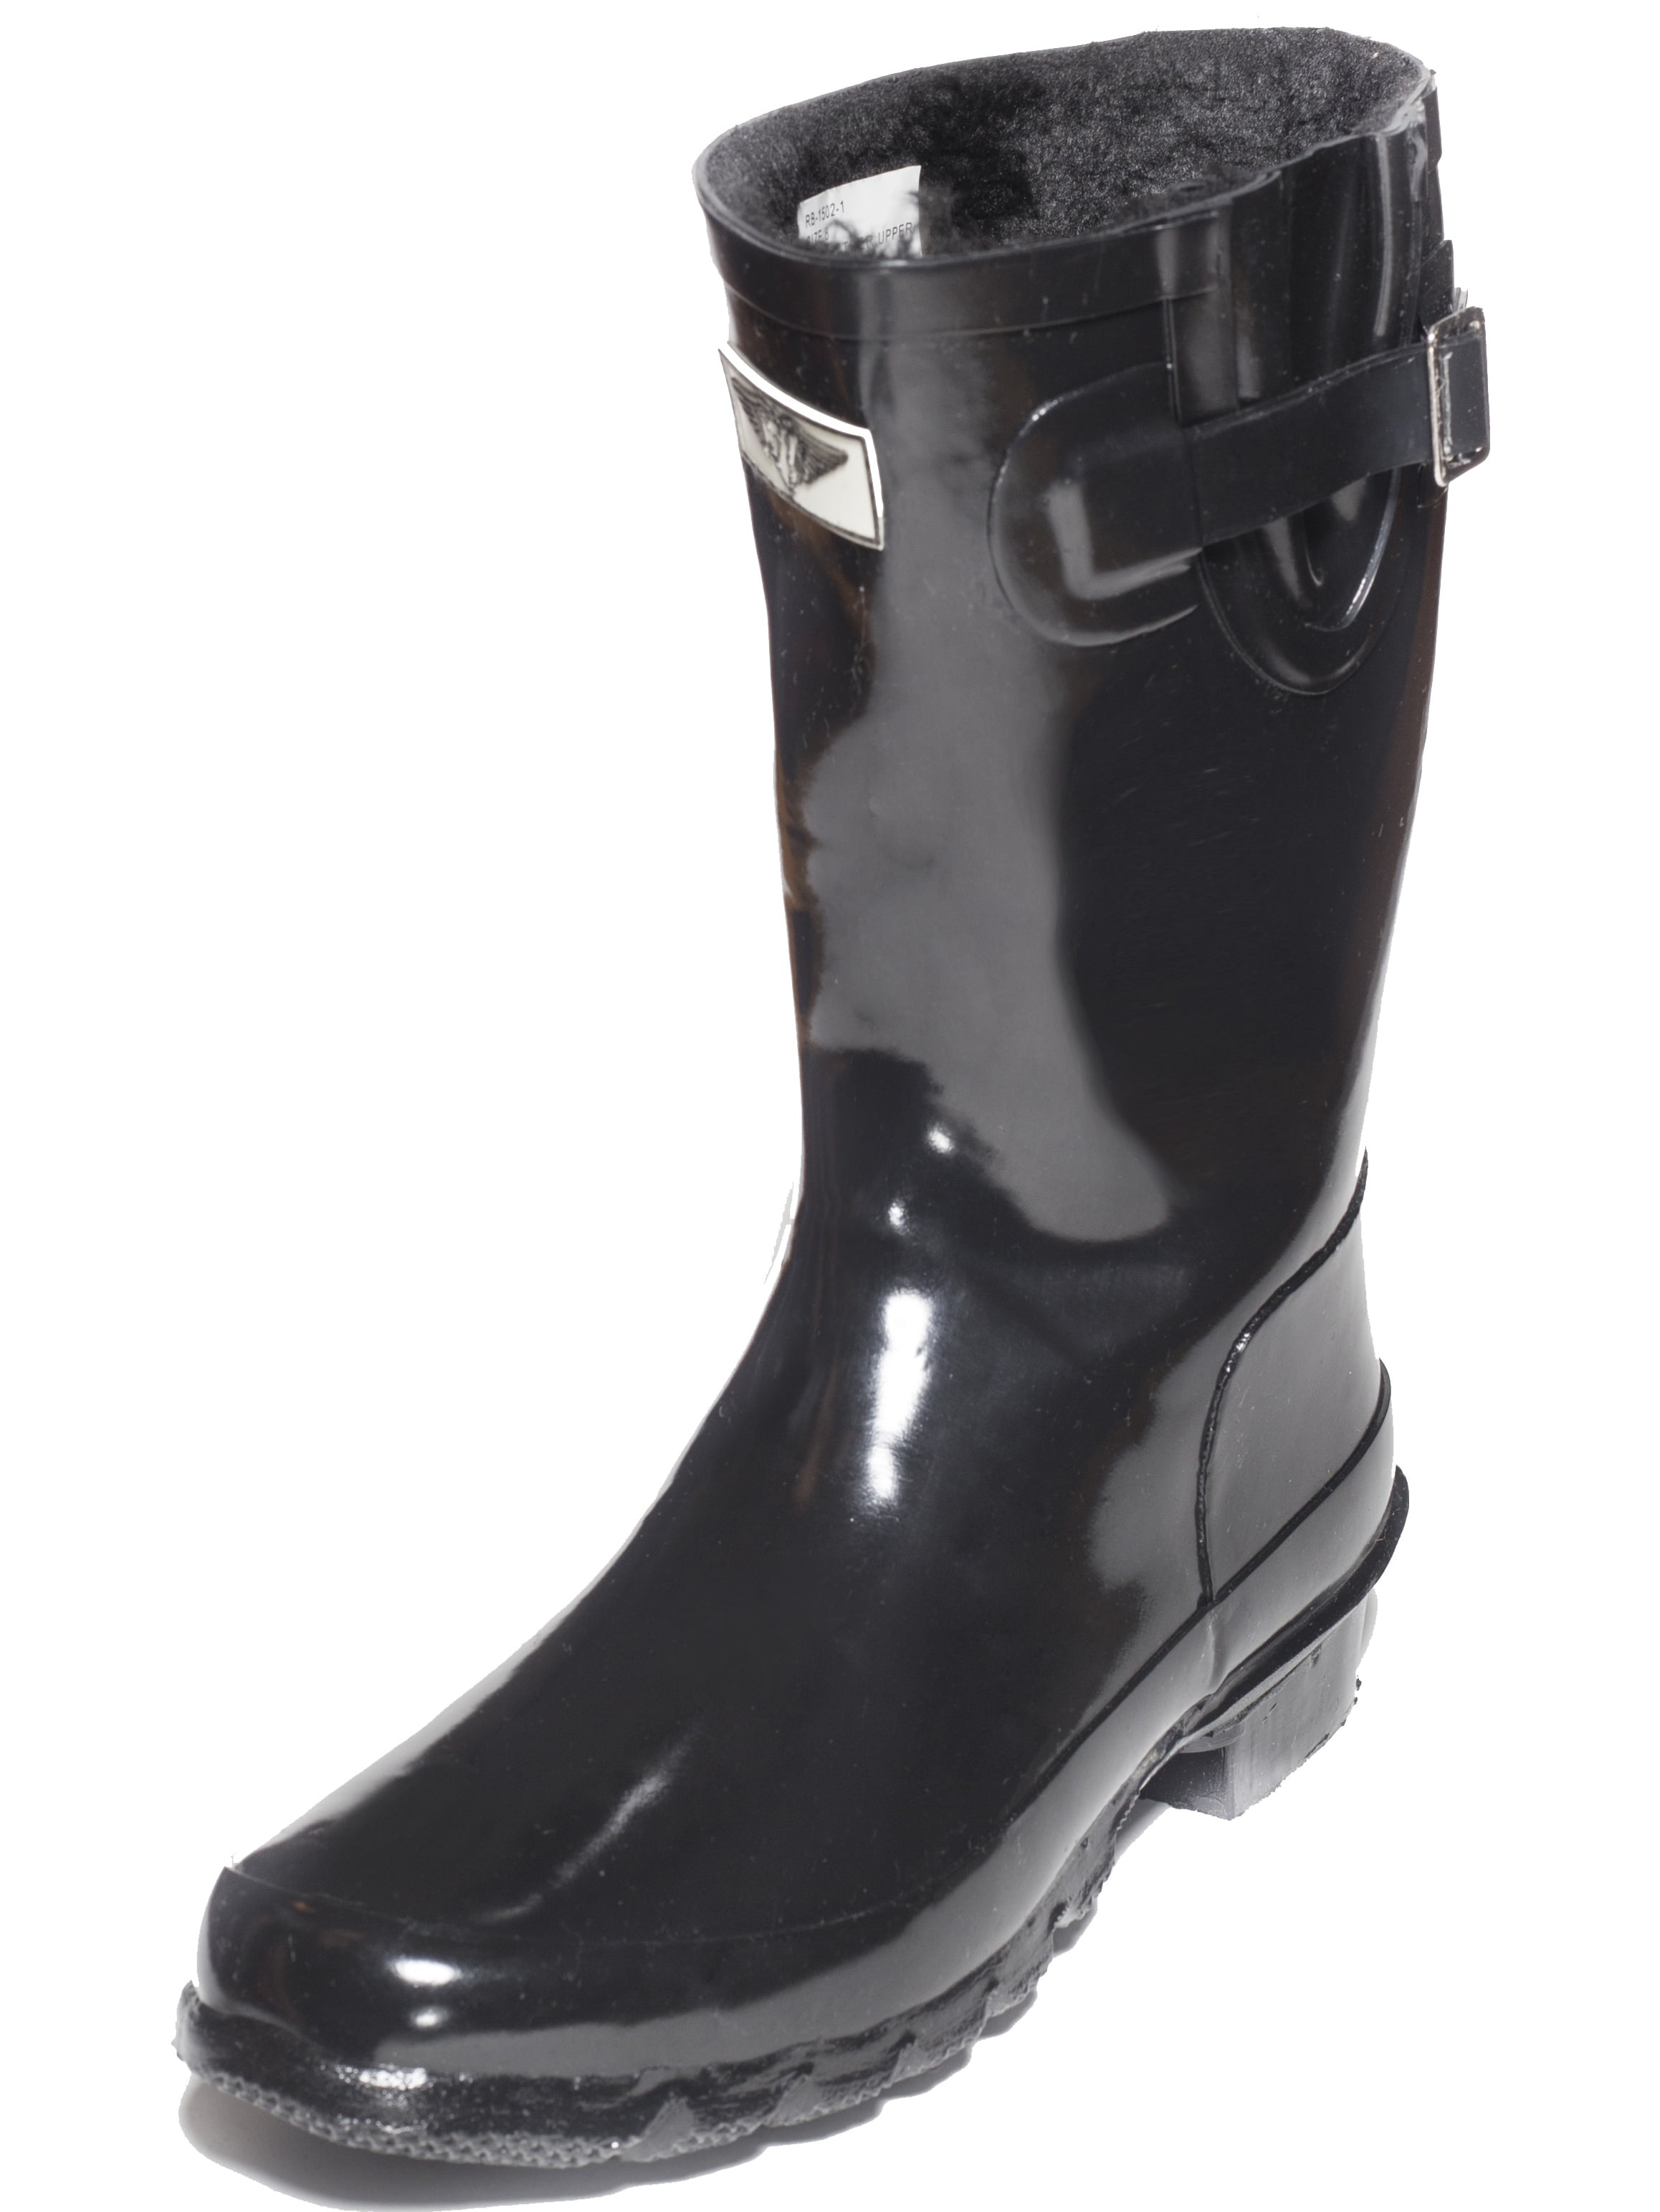 Forever Young Women's Black Rubber Mid-Calf Basic Rain Boots 9 ...